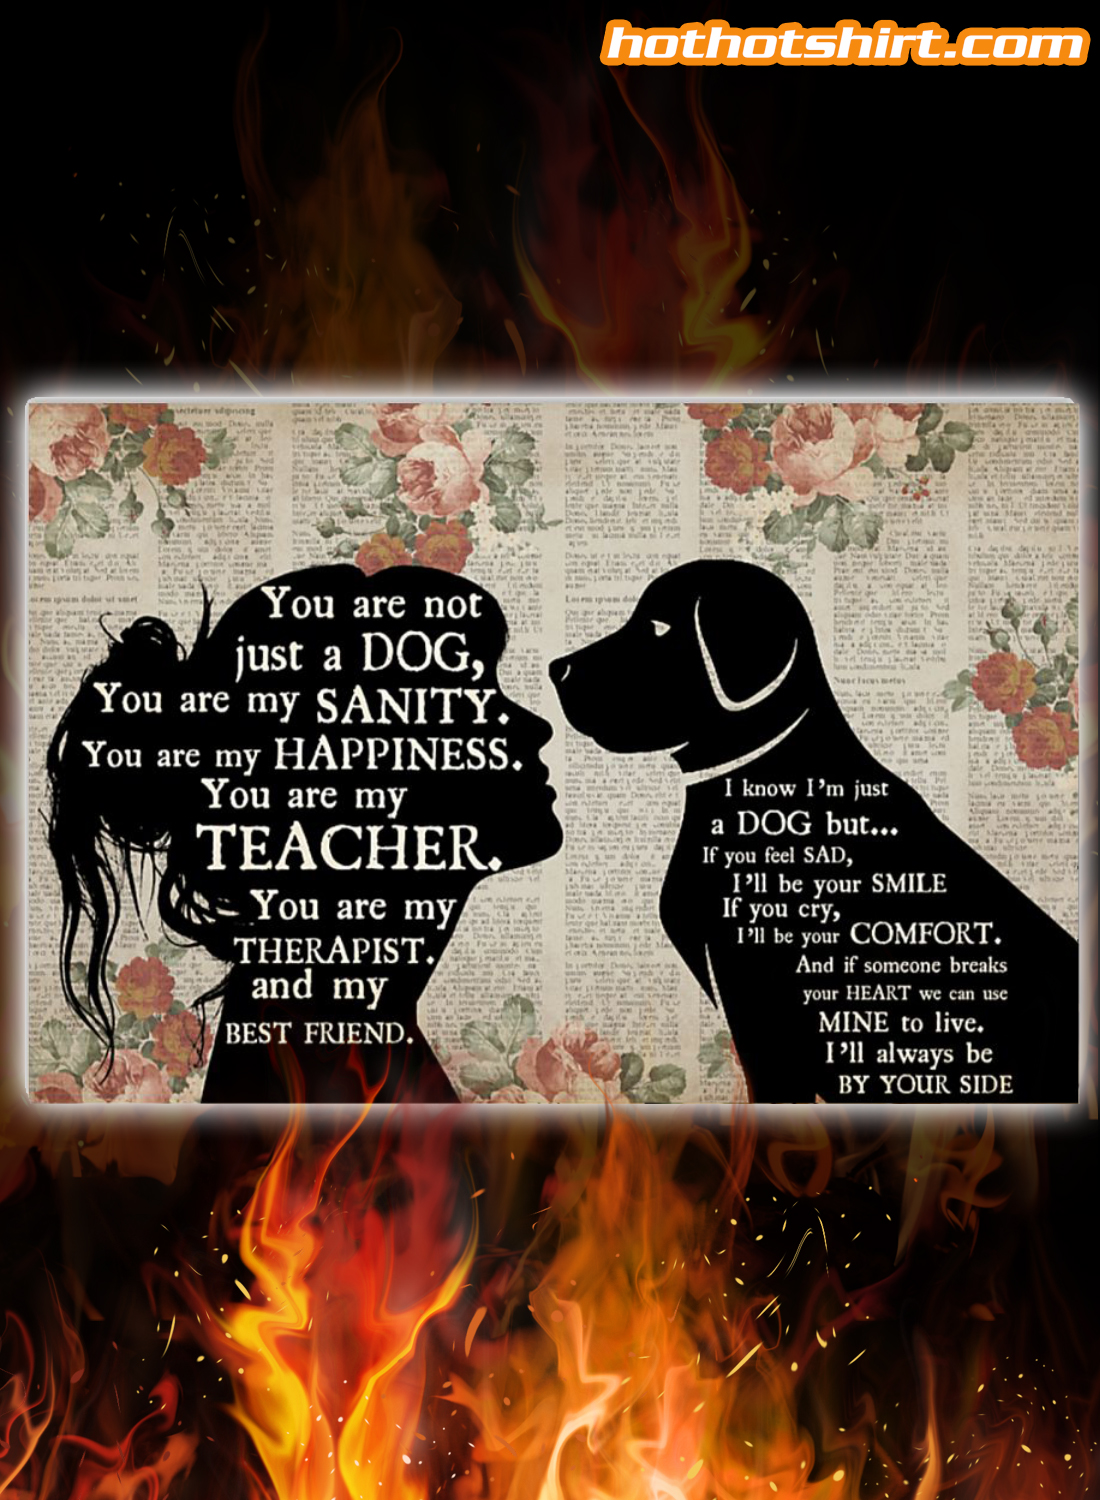 Girl and dog therapist poster